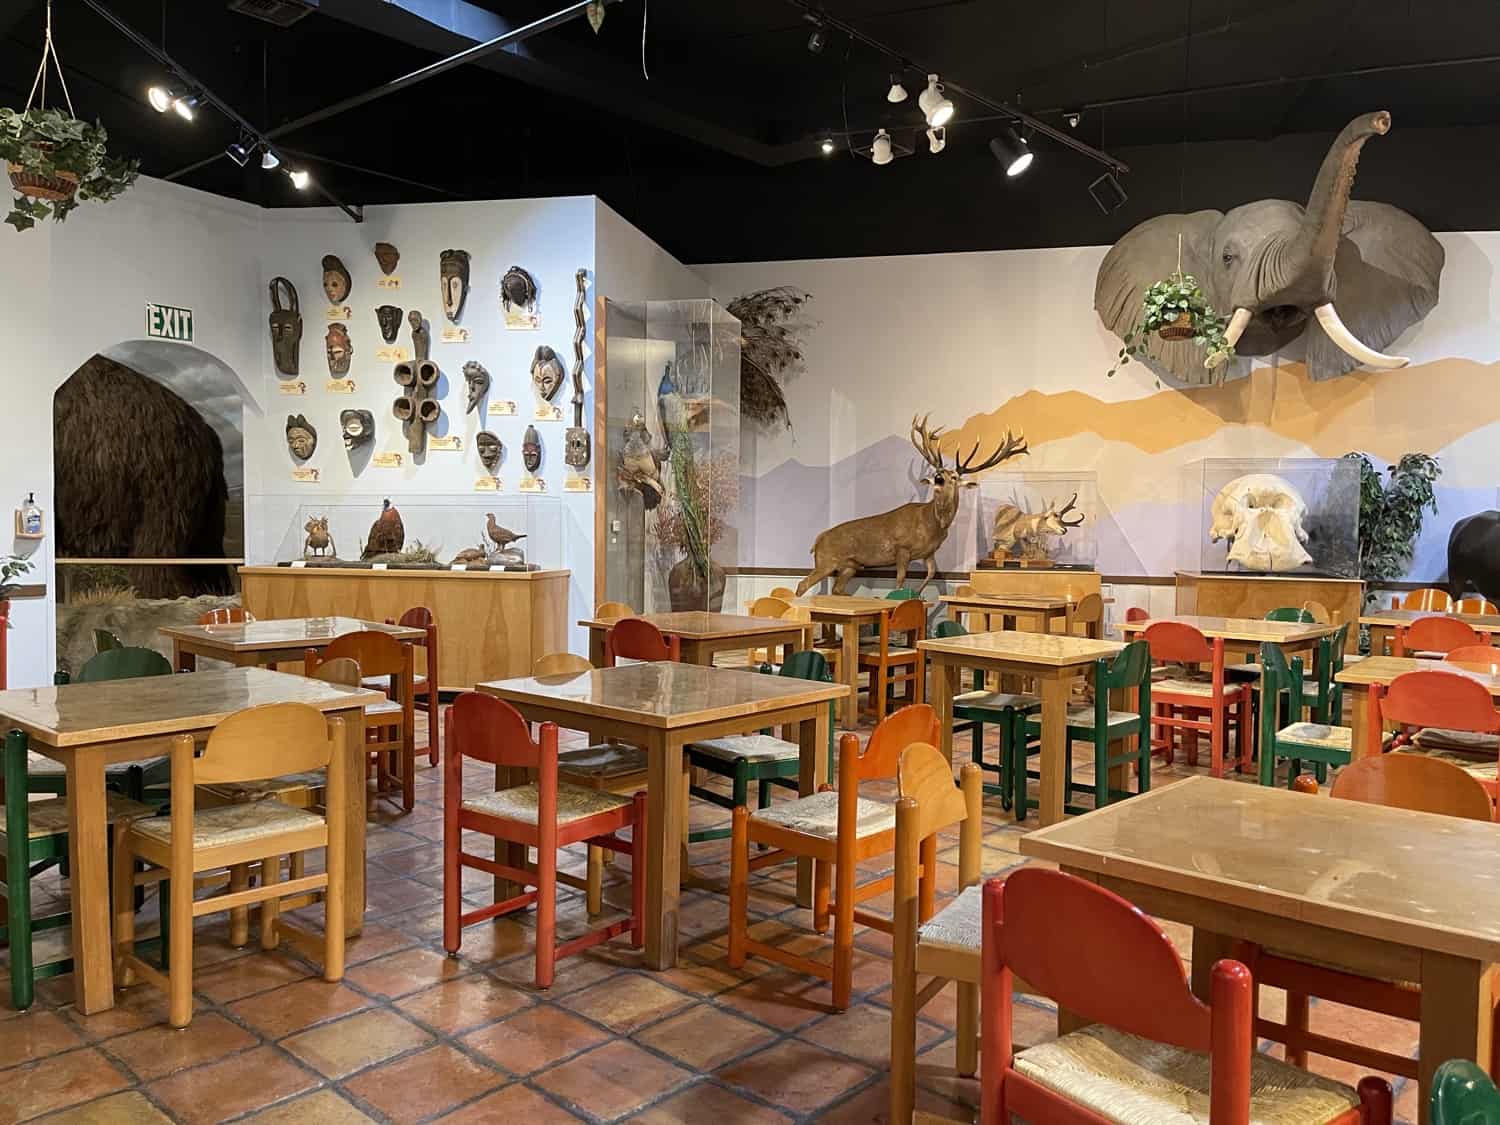 Colorful Party Room International Wildlife Museum Tucson | International Wildlife Museum - Attraction Guide